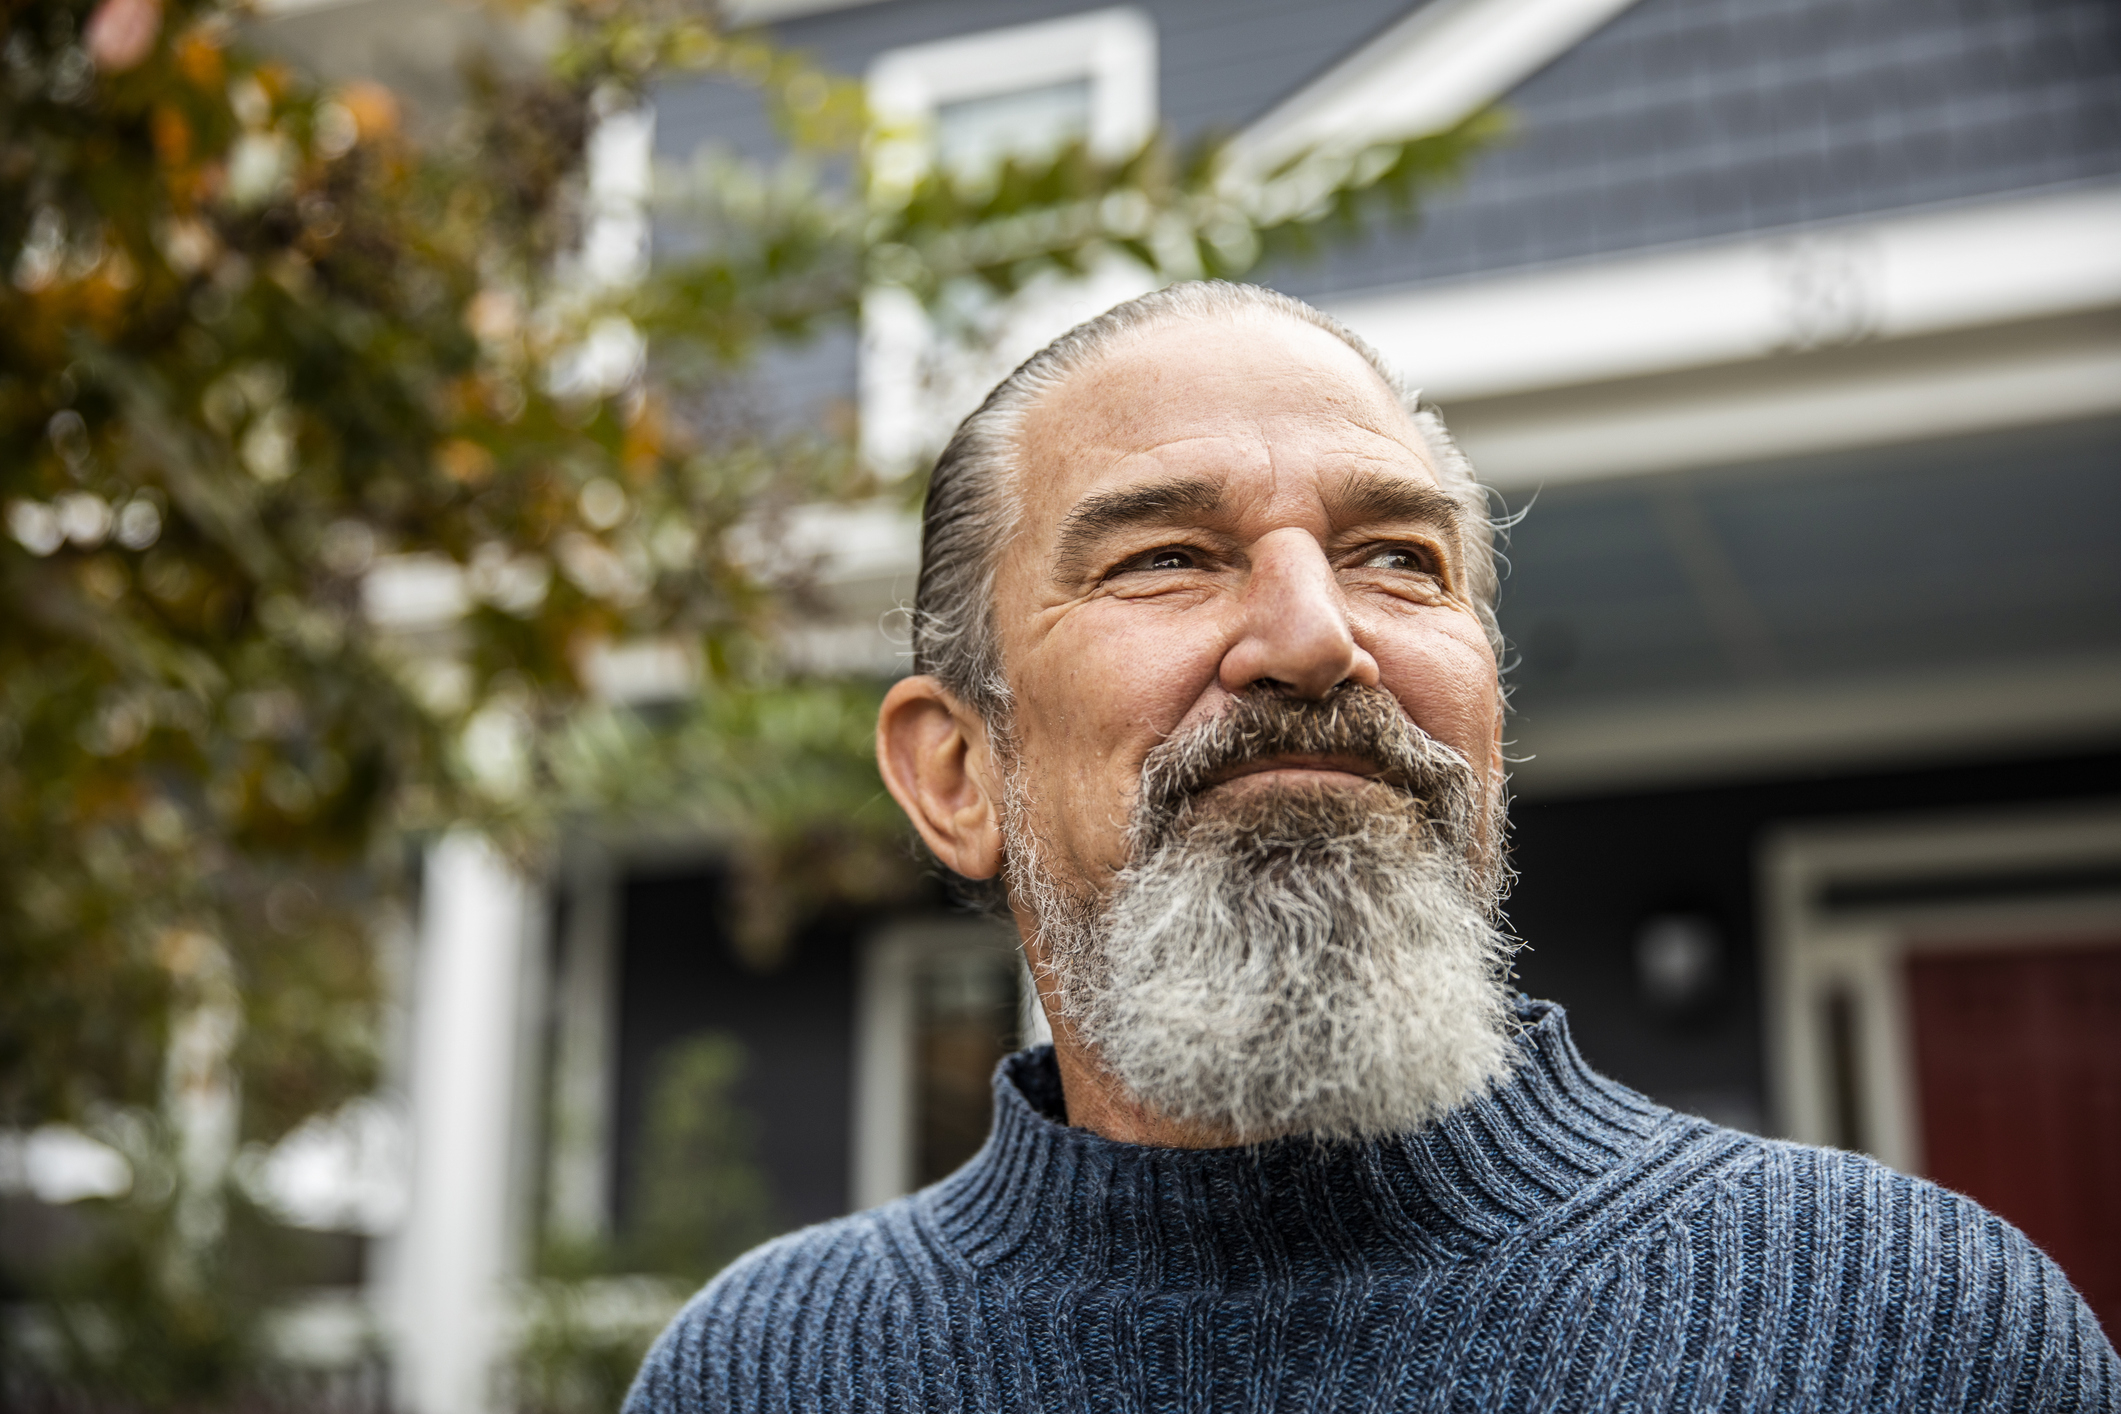 A man with a gray beard and pulled-back hair, wearing a ribbed turtleneck sweater, stands outside a house and looks off into the distance with a thoughtful expression